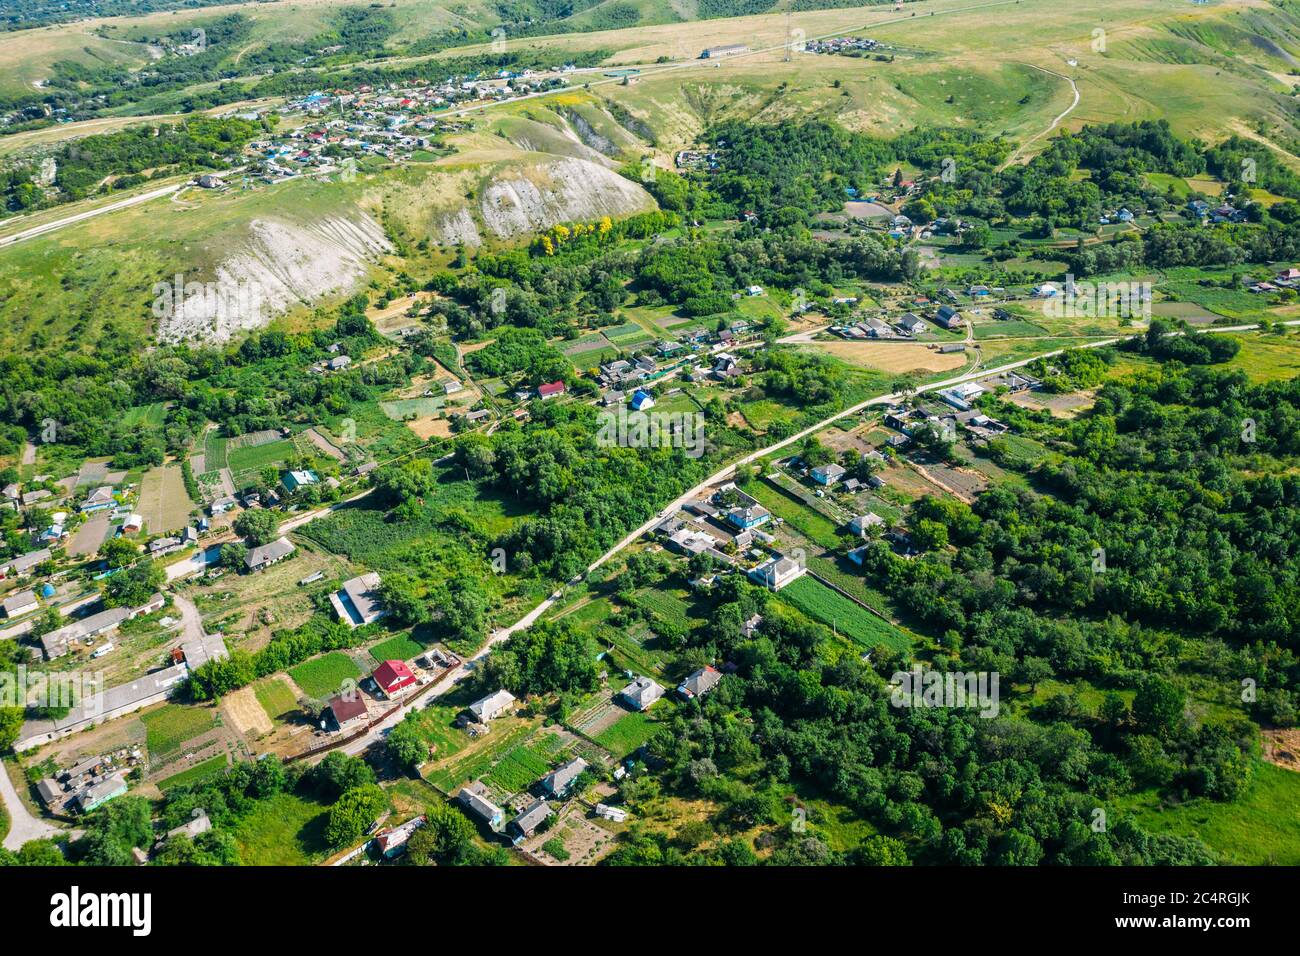 Rural village among green hills and agricultural fields in countryside , aerial view from drone. Stock Photo